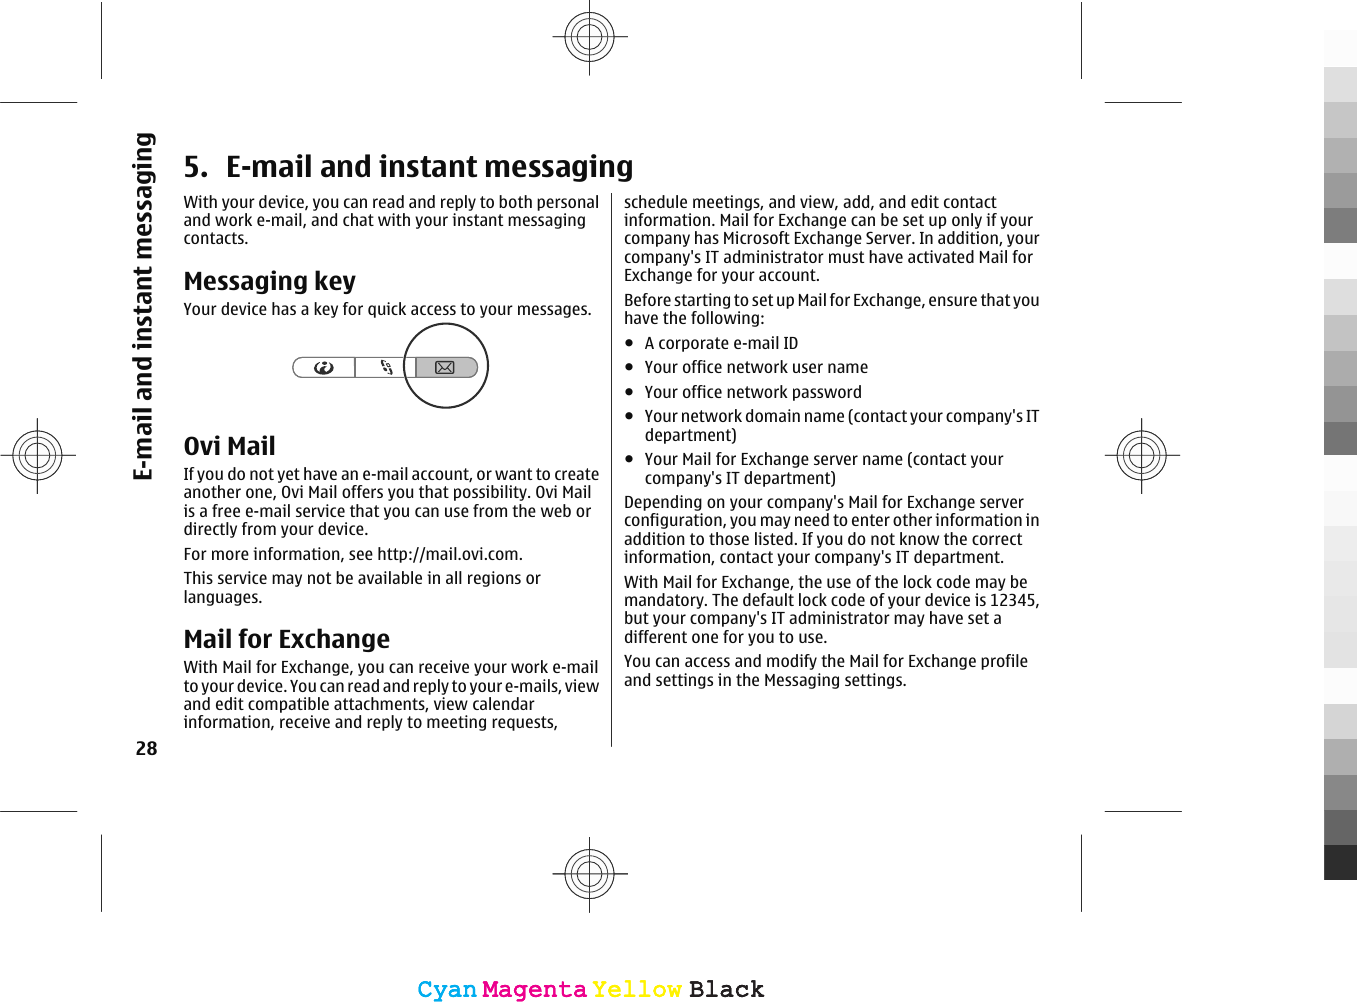 5. E-mail and instant messagingWith your device, you can read and reply to both personaland work e-mail, and chat with your instant messagingcontacts.Messaging keyYour device has a key for quick access to your messages.Ovi MailIf you do not yet have an e-mail account, or want to createanother one, Ovi Mail offers you that possibility. Ovi Mailis a free e-mail service that you can use from the web ordirectly from your device.For more information, see http://mail.ovi.com.This service may not be available in all regions orlanguages.Mail for ExchangeWith Mail for Exchange, you can receive your work e-mailto your device. You can read and reply to your e-mails, viewand edit compatible attachments, view calendarinformation, receive and reply to meeting requests,schedule meetings, and view, add, and edit contactinformation. Mail for Exchange can be set up only if yourcompany has Microsoft Exchange Server. In addition, yourcompany&apos;s IT administrator must have activated Mail forExchange for your account.Before starting to set up Mail for Exchange, ensure that youhave the following:●A corporate e-mail ID●Your office network user name●Your office network password●Your network domain name (contact your company&apos;s ITdepartment)●Your Mail for Exchange server name (contact yourcompany&apos;s IT department)Depending on your company&apos;s Mail for Exchange serverconfiguration, you may need to enter other information inaddition to those listed. If you do not know the correctinformation, contact your company&apos;s IT department.With Mail for Exchange, the use of the lock code may bemandatory. The default lock code of your device is 12345,but your company&apos;s IT administrator may have set adifferent one for you to use.You can access and modify the Mail for Exchange profileand settings in the Messaging settings.28E-mail and instant messagingCyanCyanMagentaMagentaYellowYellowBlackBlackCyanCyanMagentaMagentaYellowYellowBlackBlack